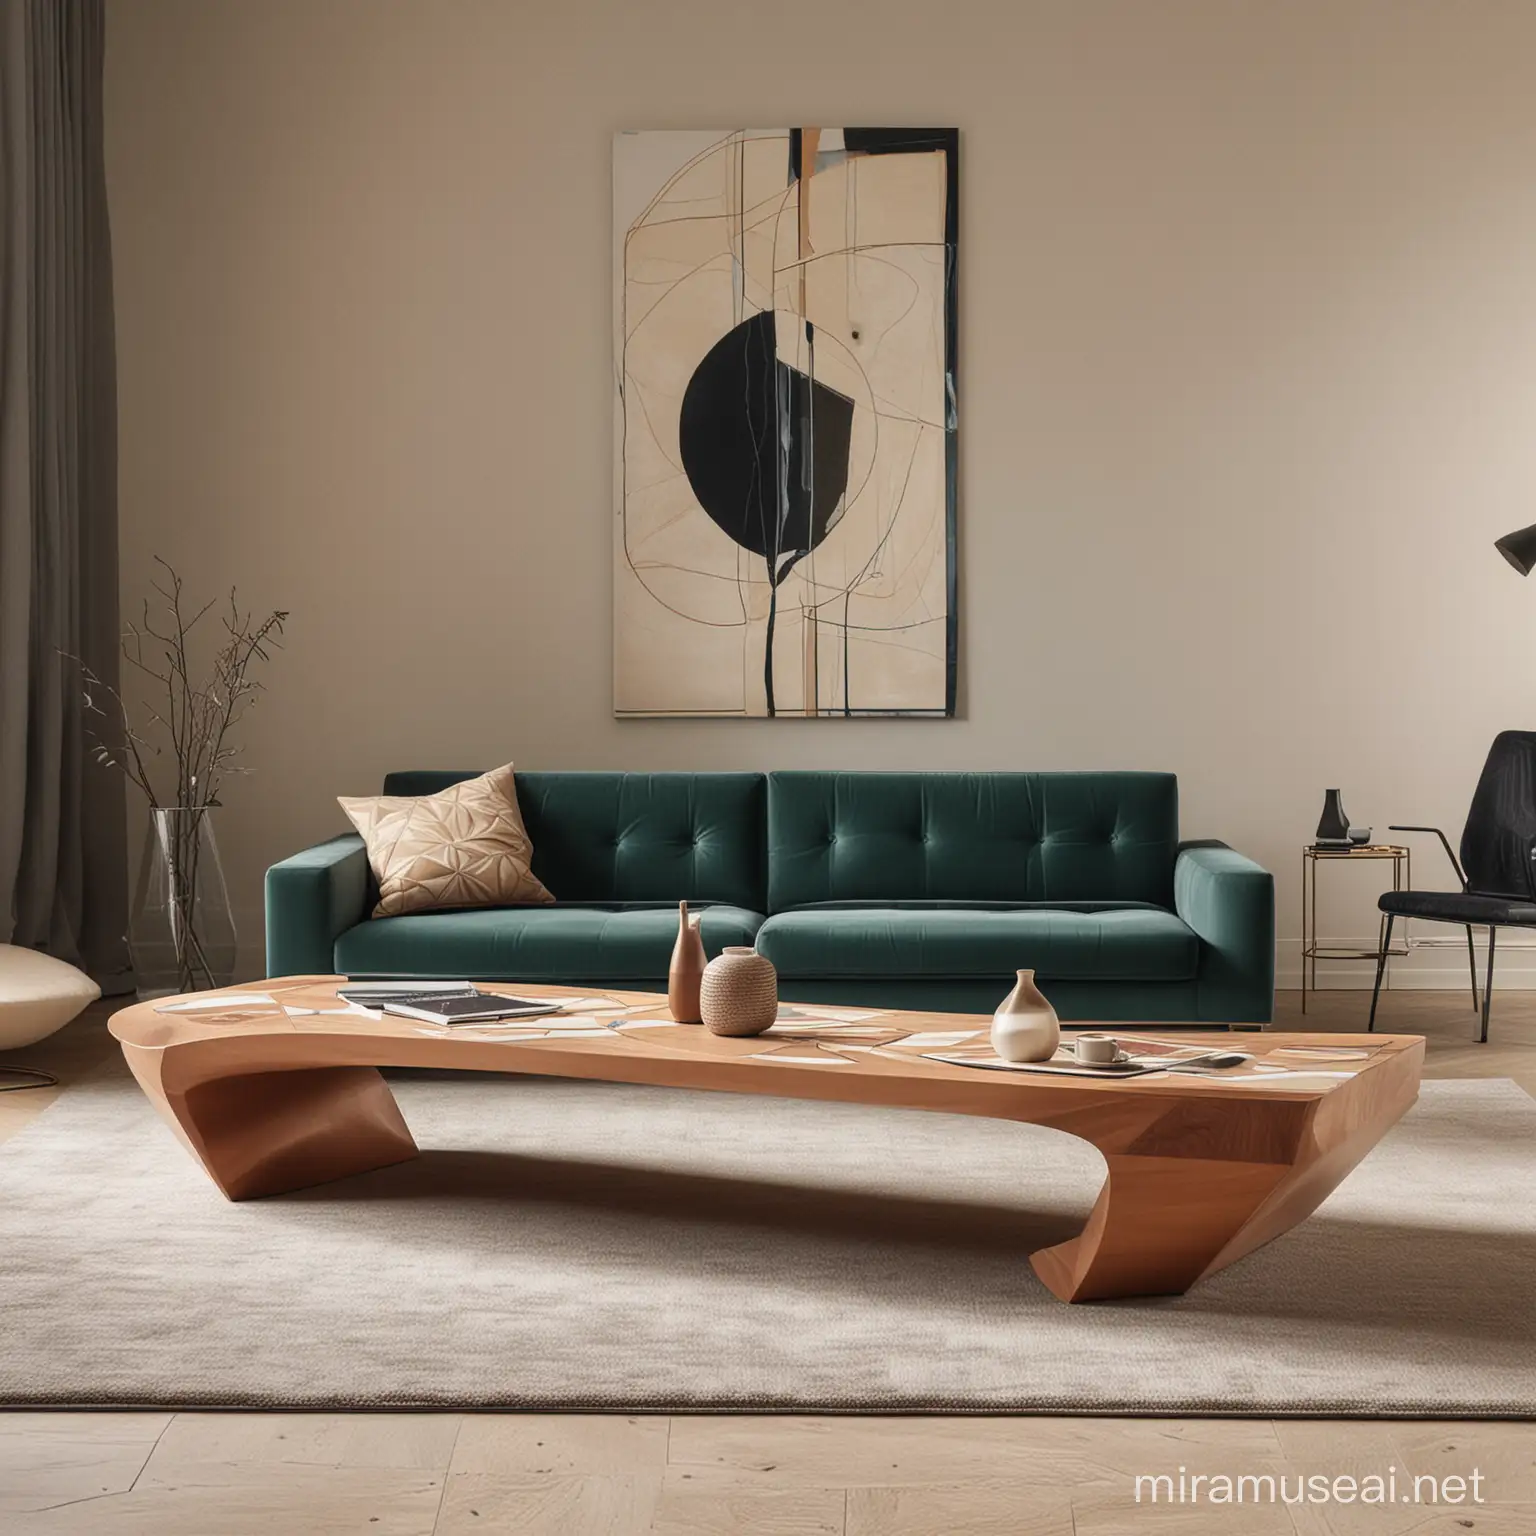 #artwork#arch#interiores#ad#parisstyle#collectibledesign#collectiontwentyseven_#vladimirkagan#manifiesto#tvtable#pierrejeanneret#mobiliario#charlotteperriand#bestintown#gubiofficial#paulinpaulinpaulin#cctapis#atelierfevrier_#dianaghandourstudio#archlovers#collectibledesign#geometric#perspective#detailview#theinvisiblecollection#nycphotographer#nycvibes#parisvibes_#londonvibes#beirutvibes#whats_hipp#quotesaboutlife#artoftheday#artcollective#cassina#tacchini